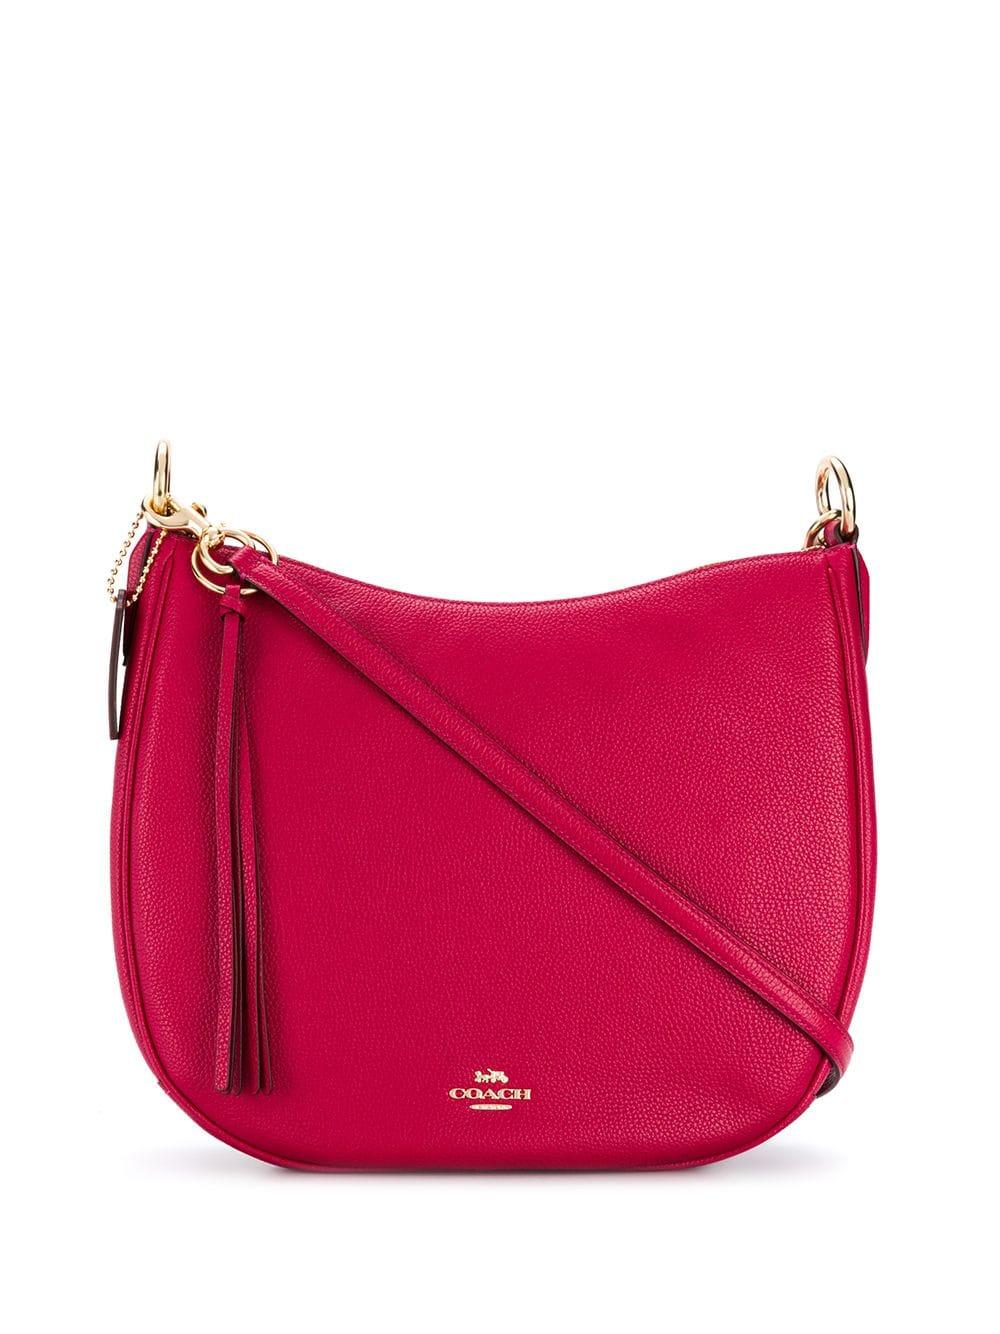 COACH Leather Sutton Hobo Shoulder Bag in Pink - Lyst